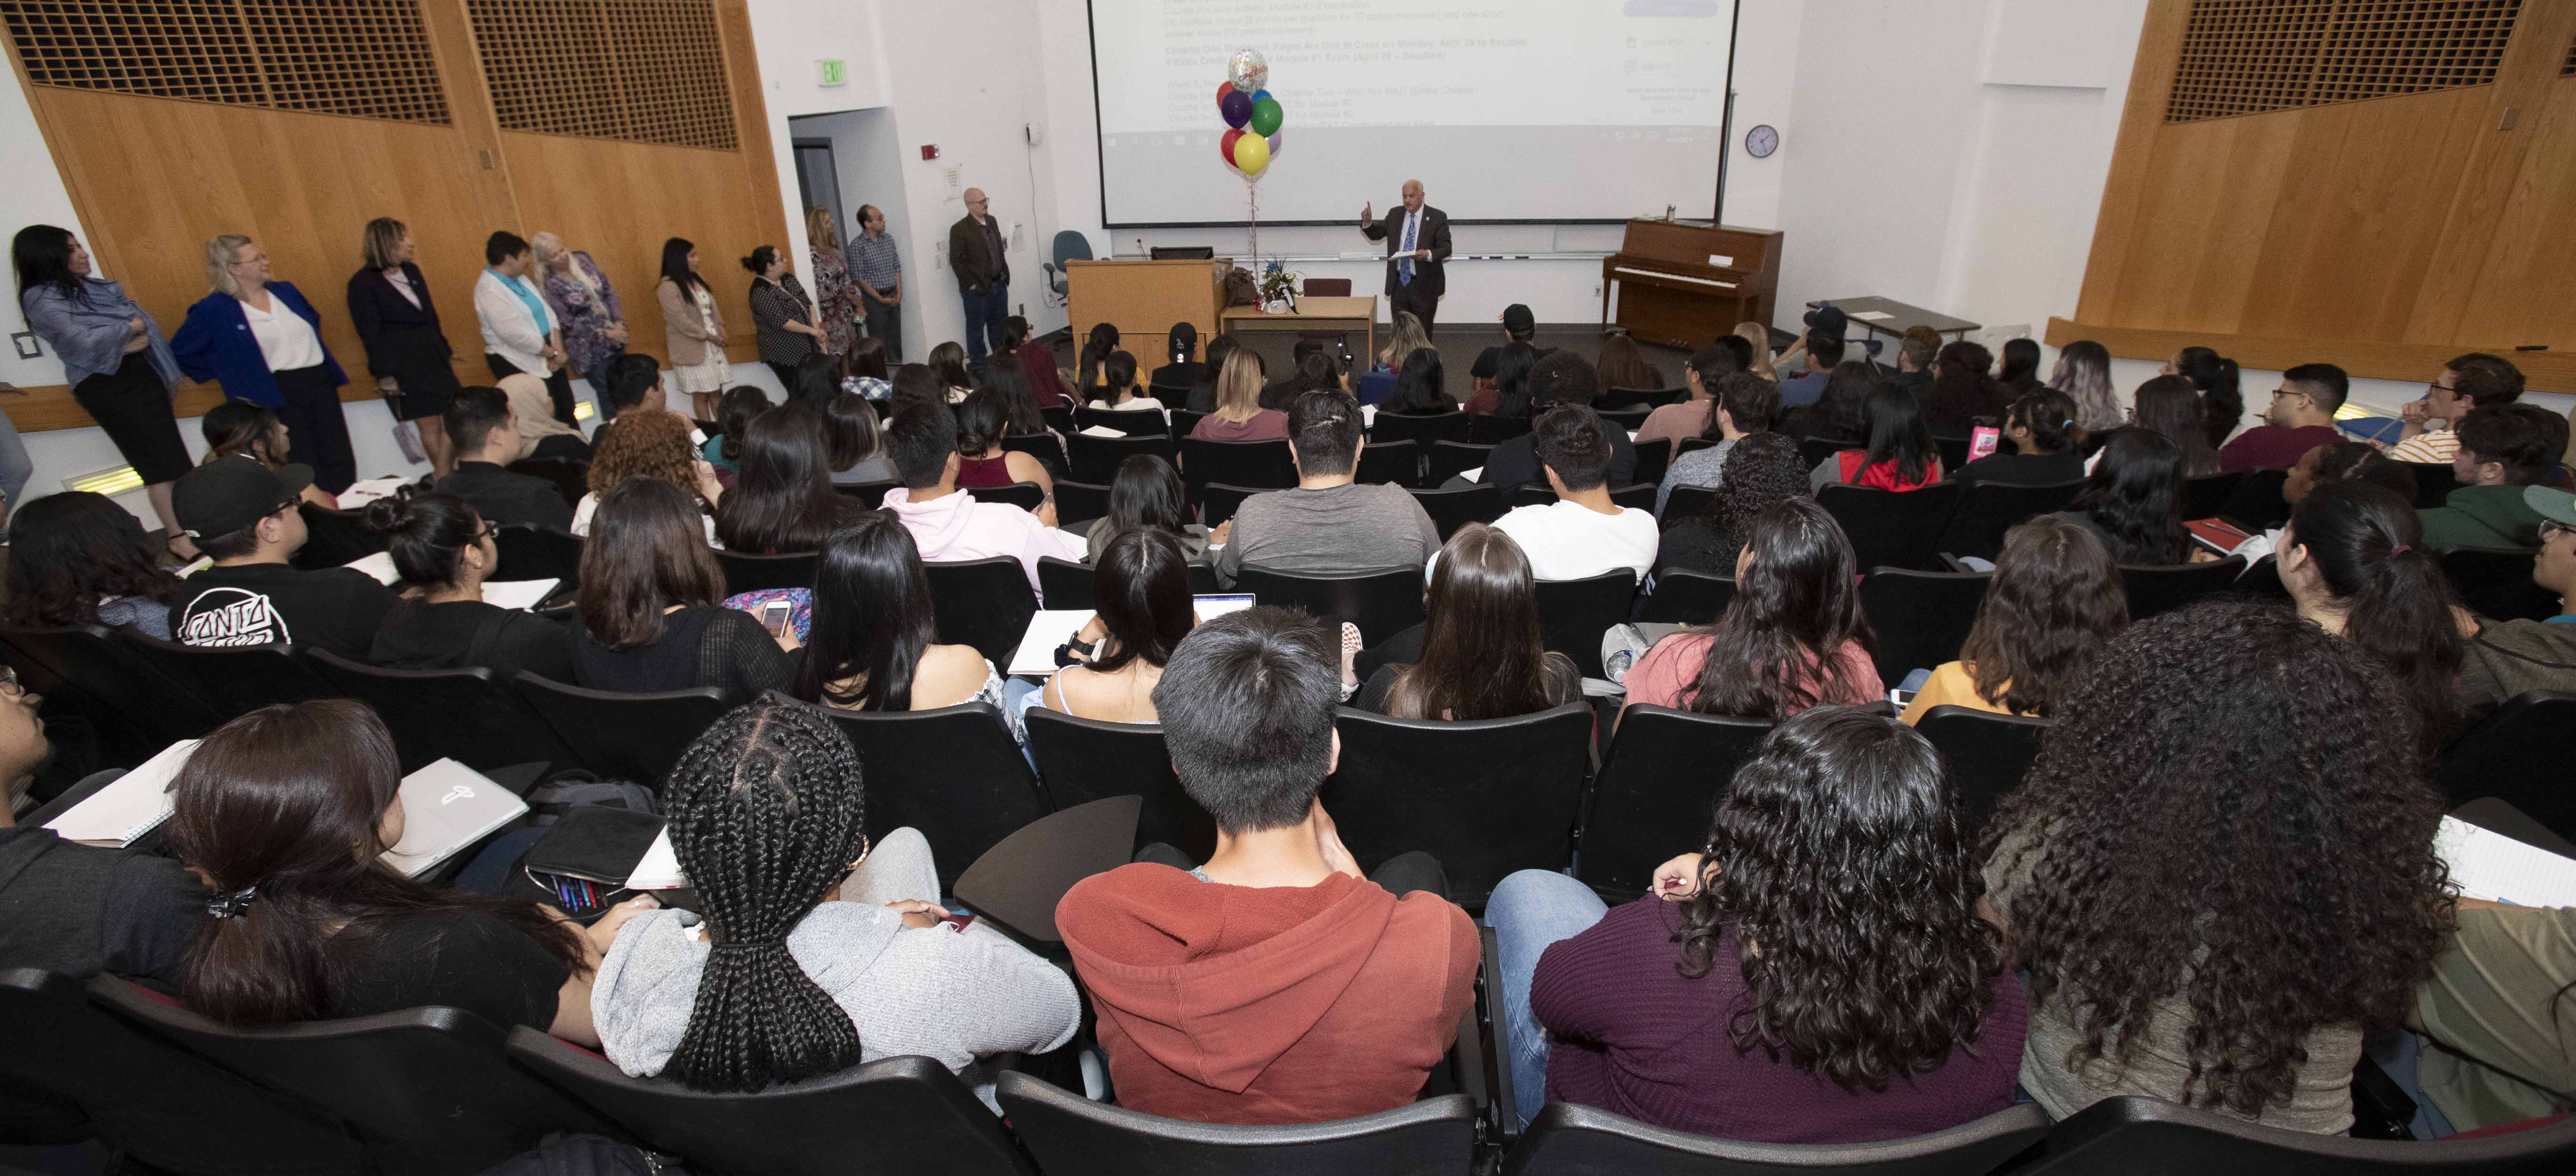 Grisham’s Social Sciences 165 class on April 22 was interrupted by a delegation led by university President Tomás D. Morales along with 25 senior administrators and faculty members barging into his classroom to make the announcement.  